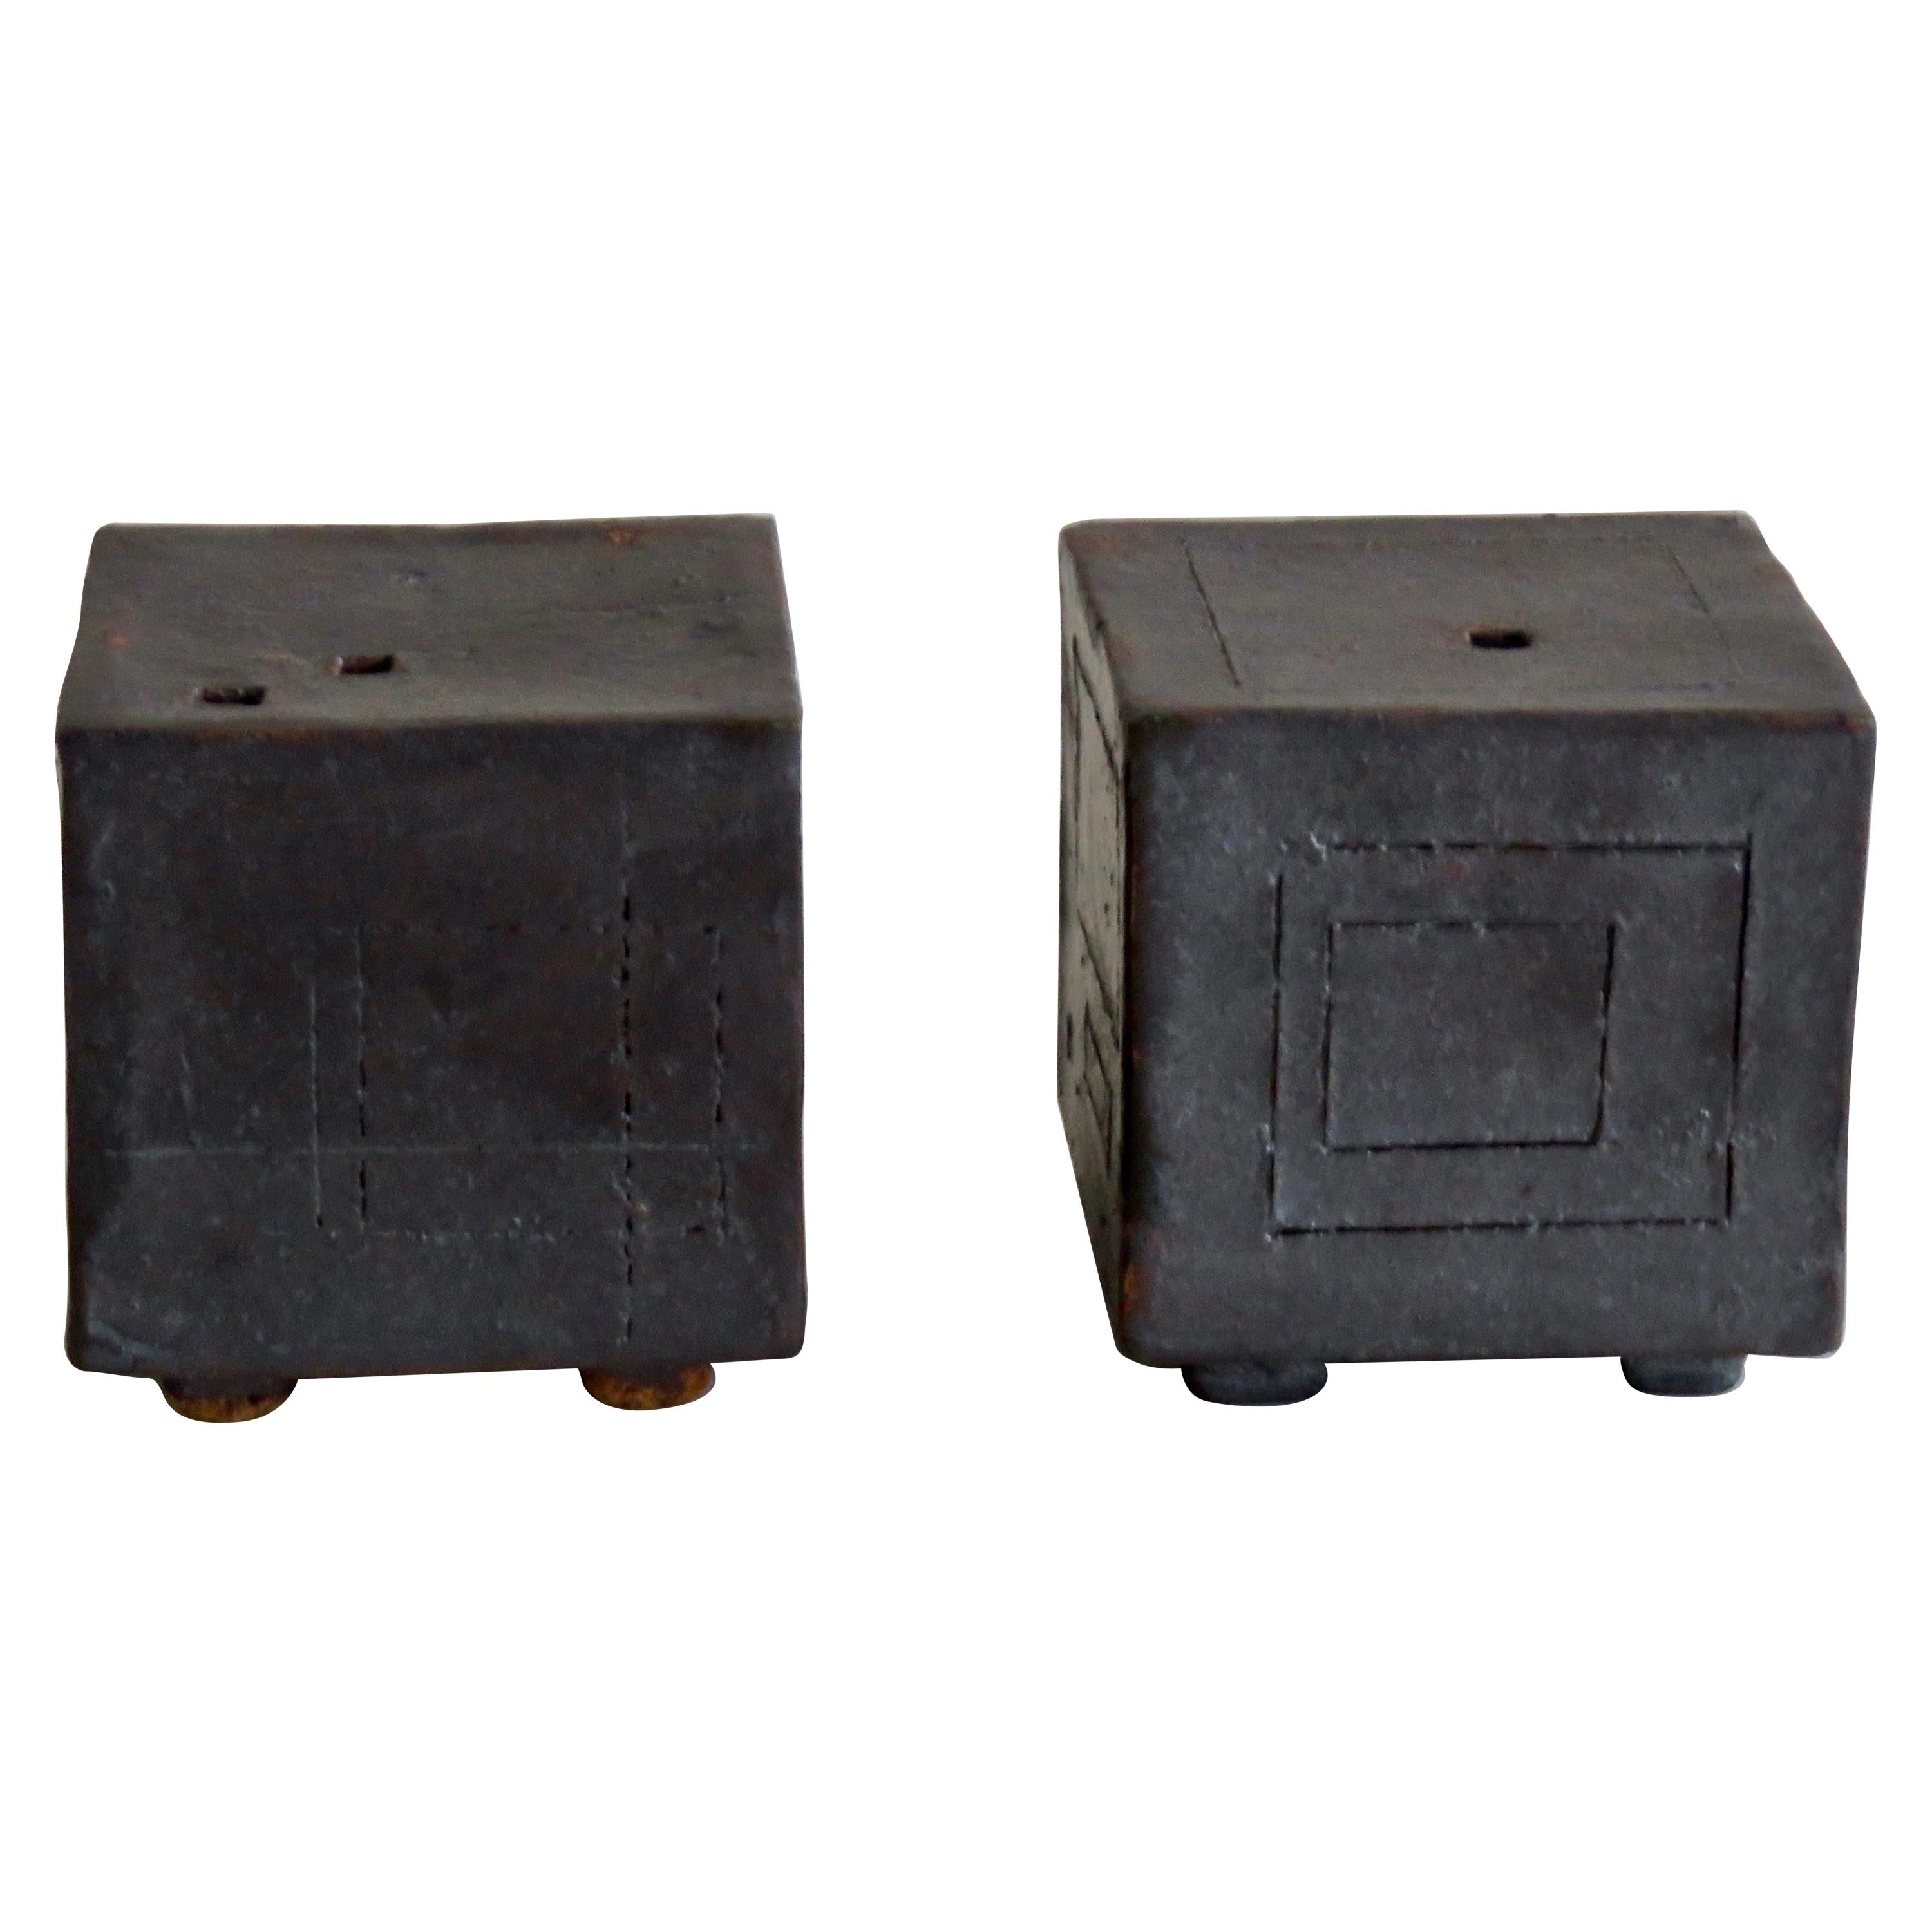 Two Small Contemplation Boxes, Cubes, Hand Built Glazed Stoneware